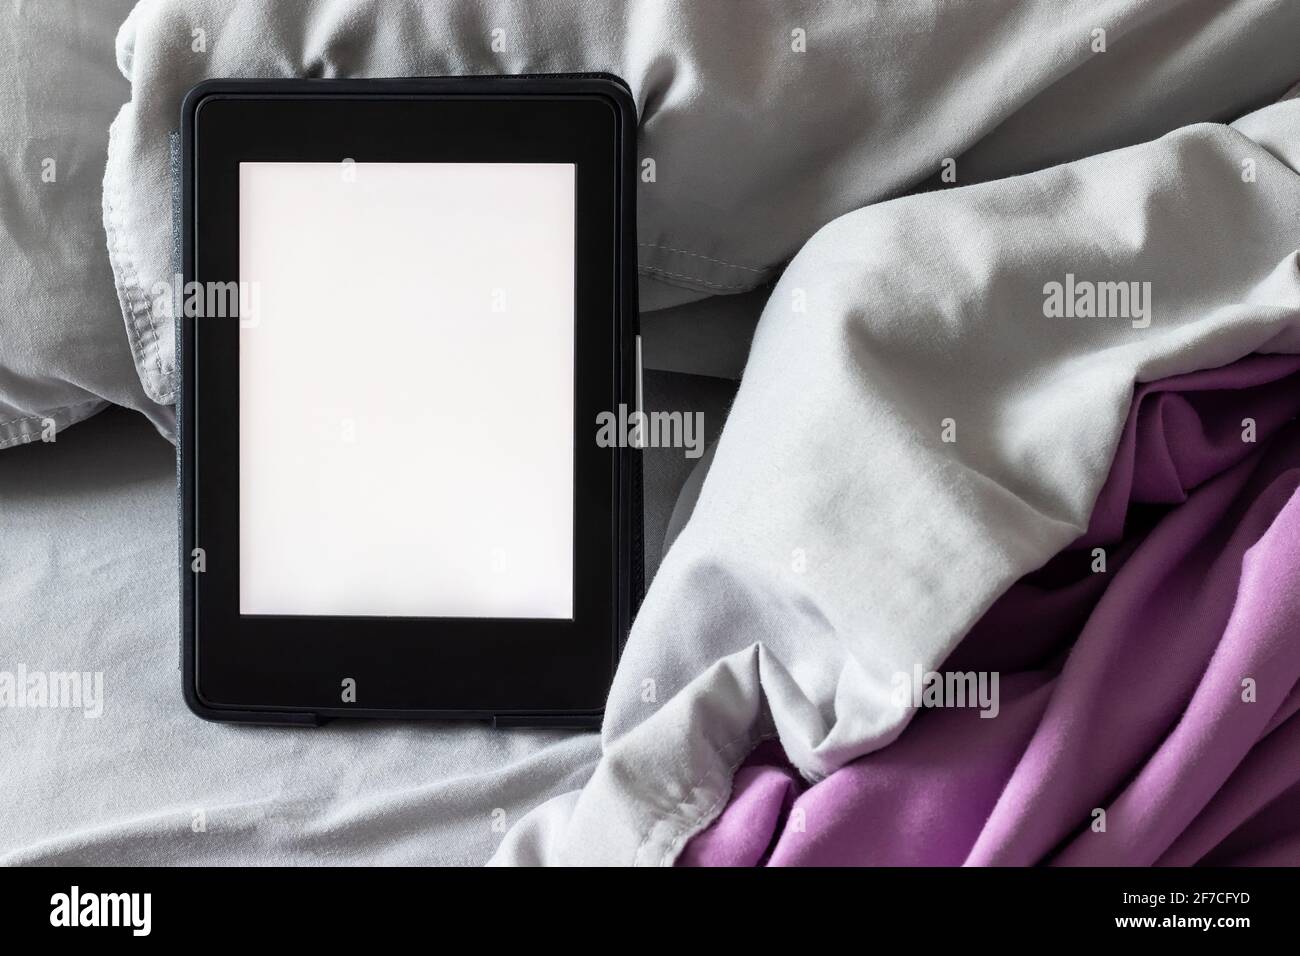 A modern black e-reader electronic book with a blank screen on a gray and purple bed. Mockup tablet on microfiber bedding closeup Stock Photo